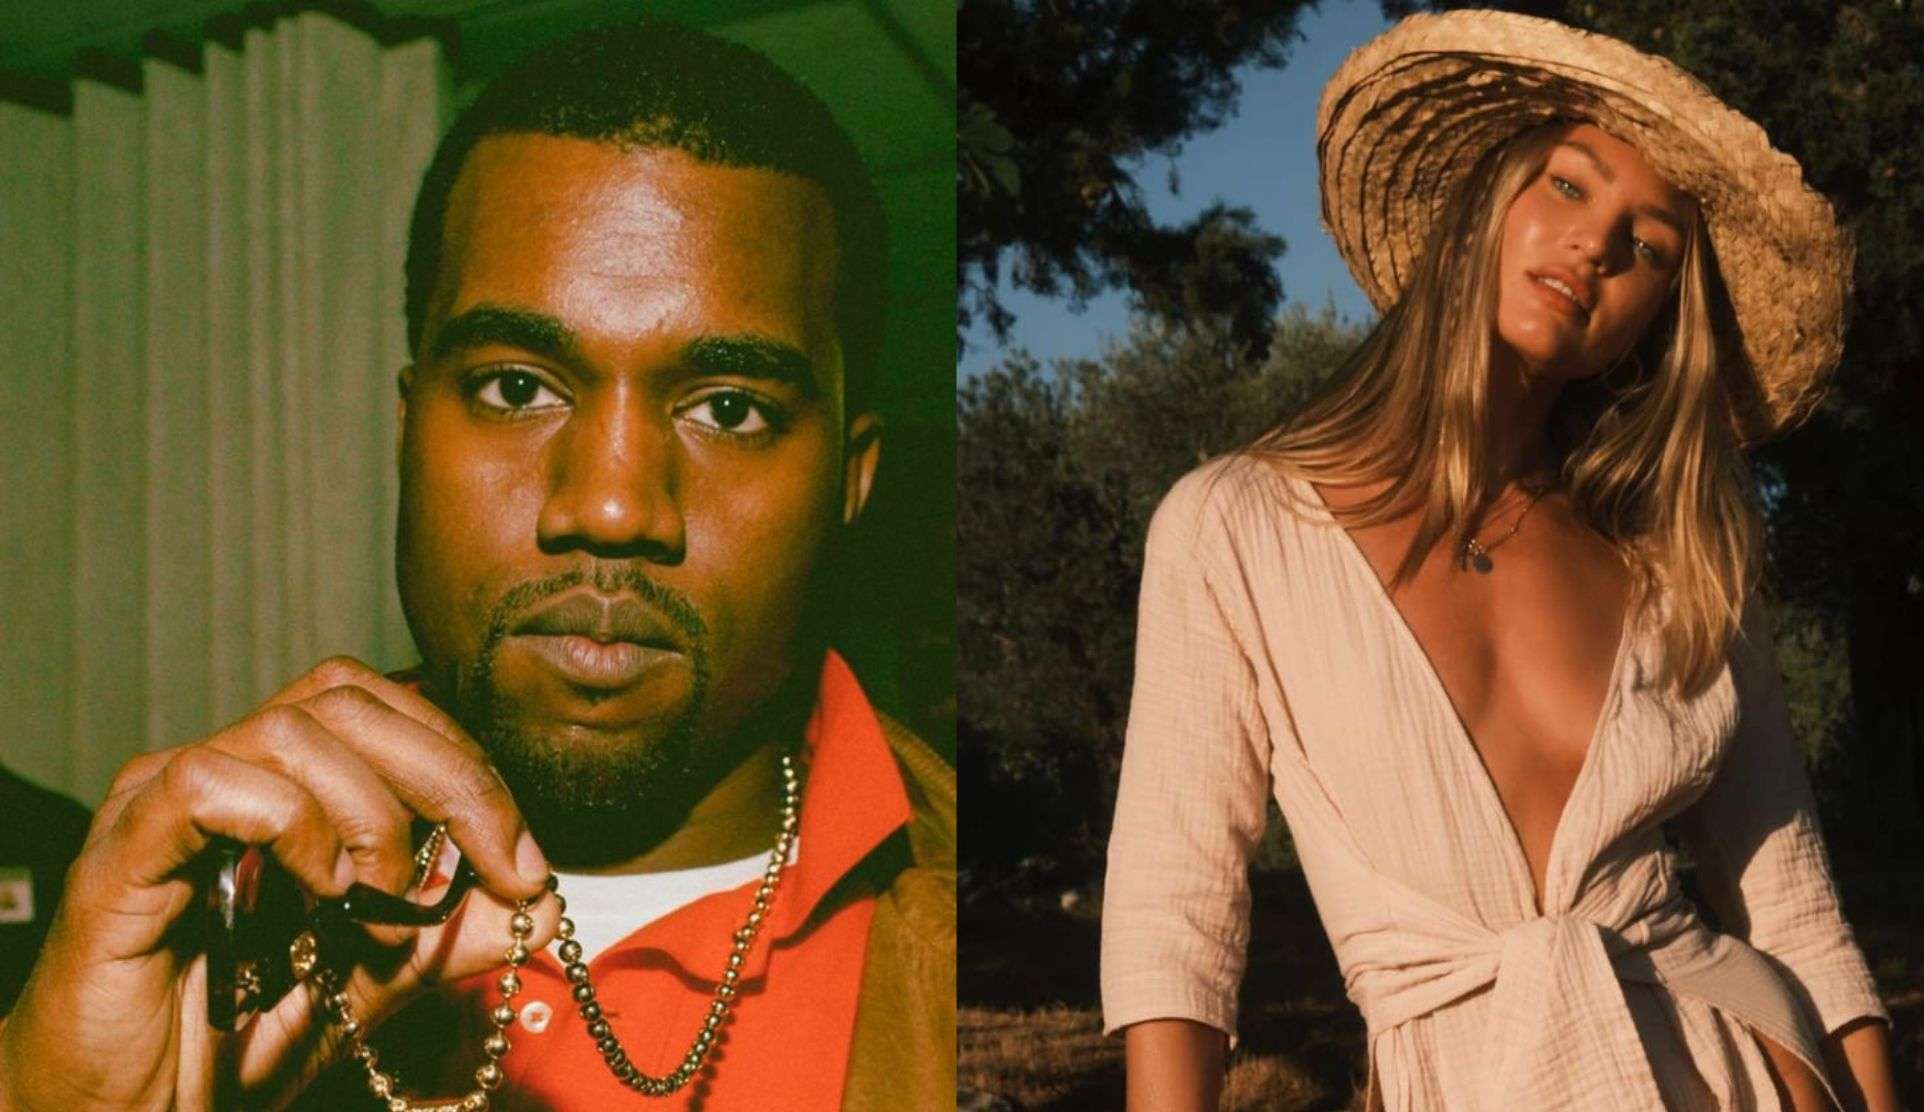 Kanye West is having a new romance with model Candice